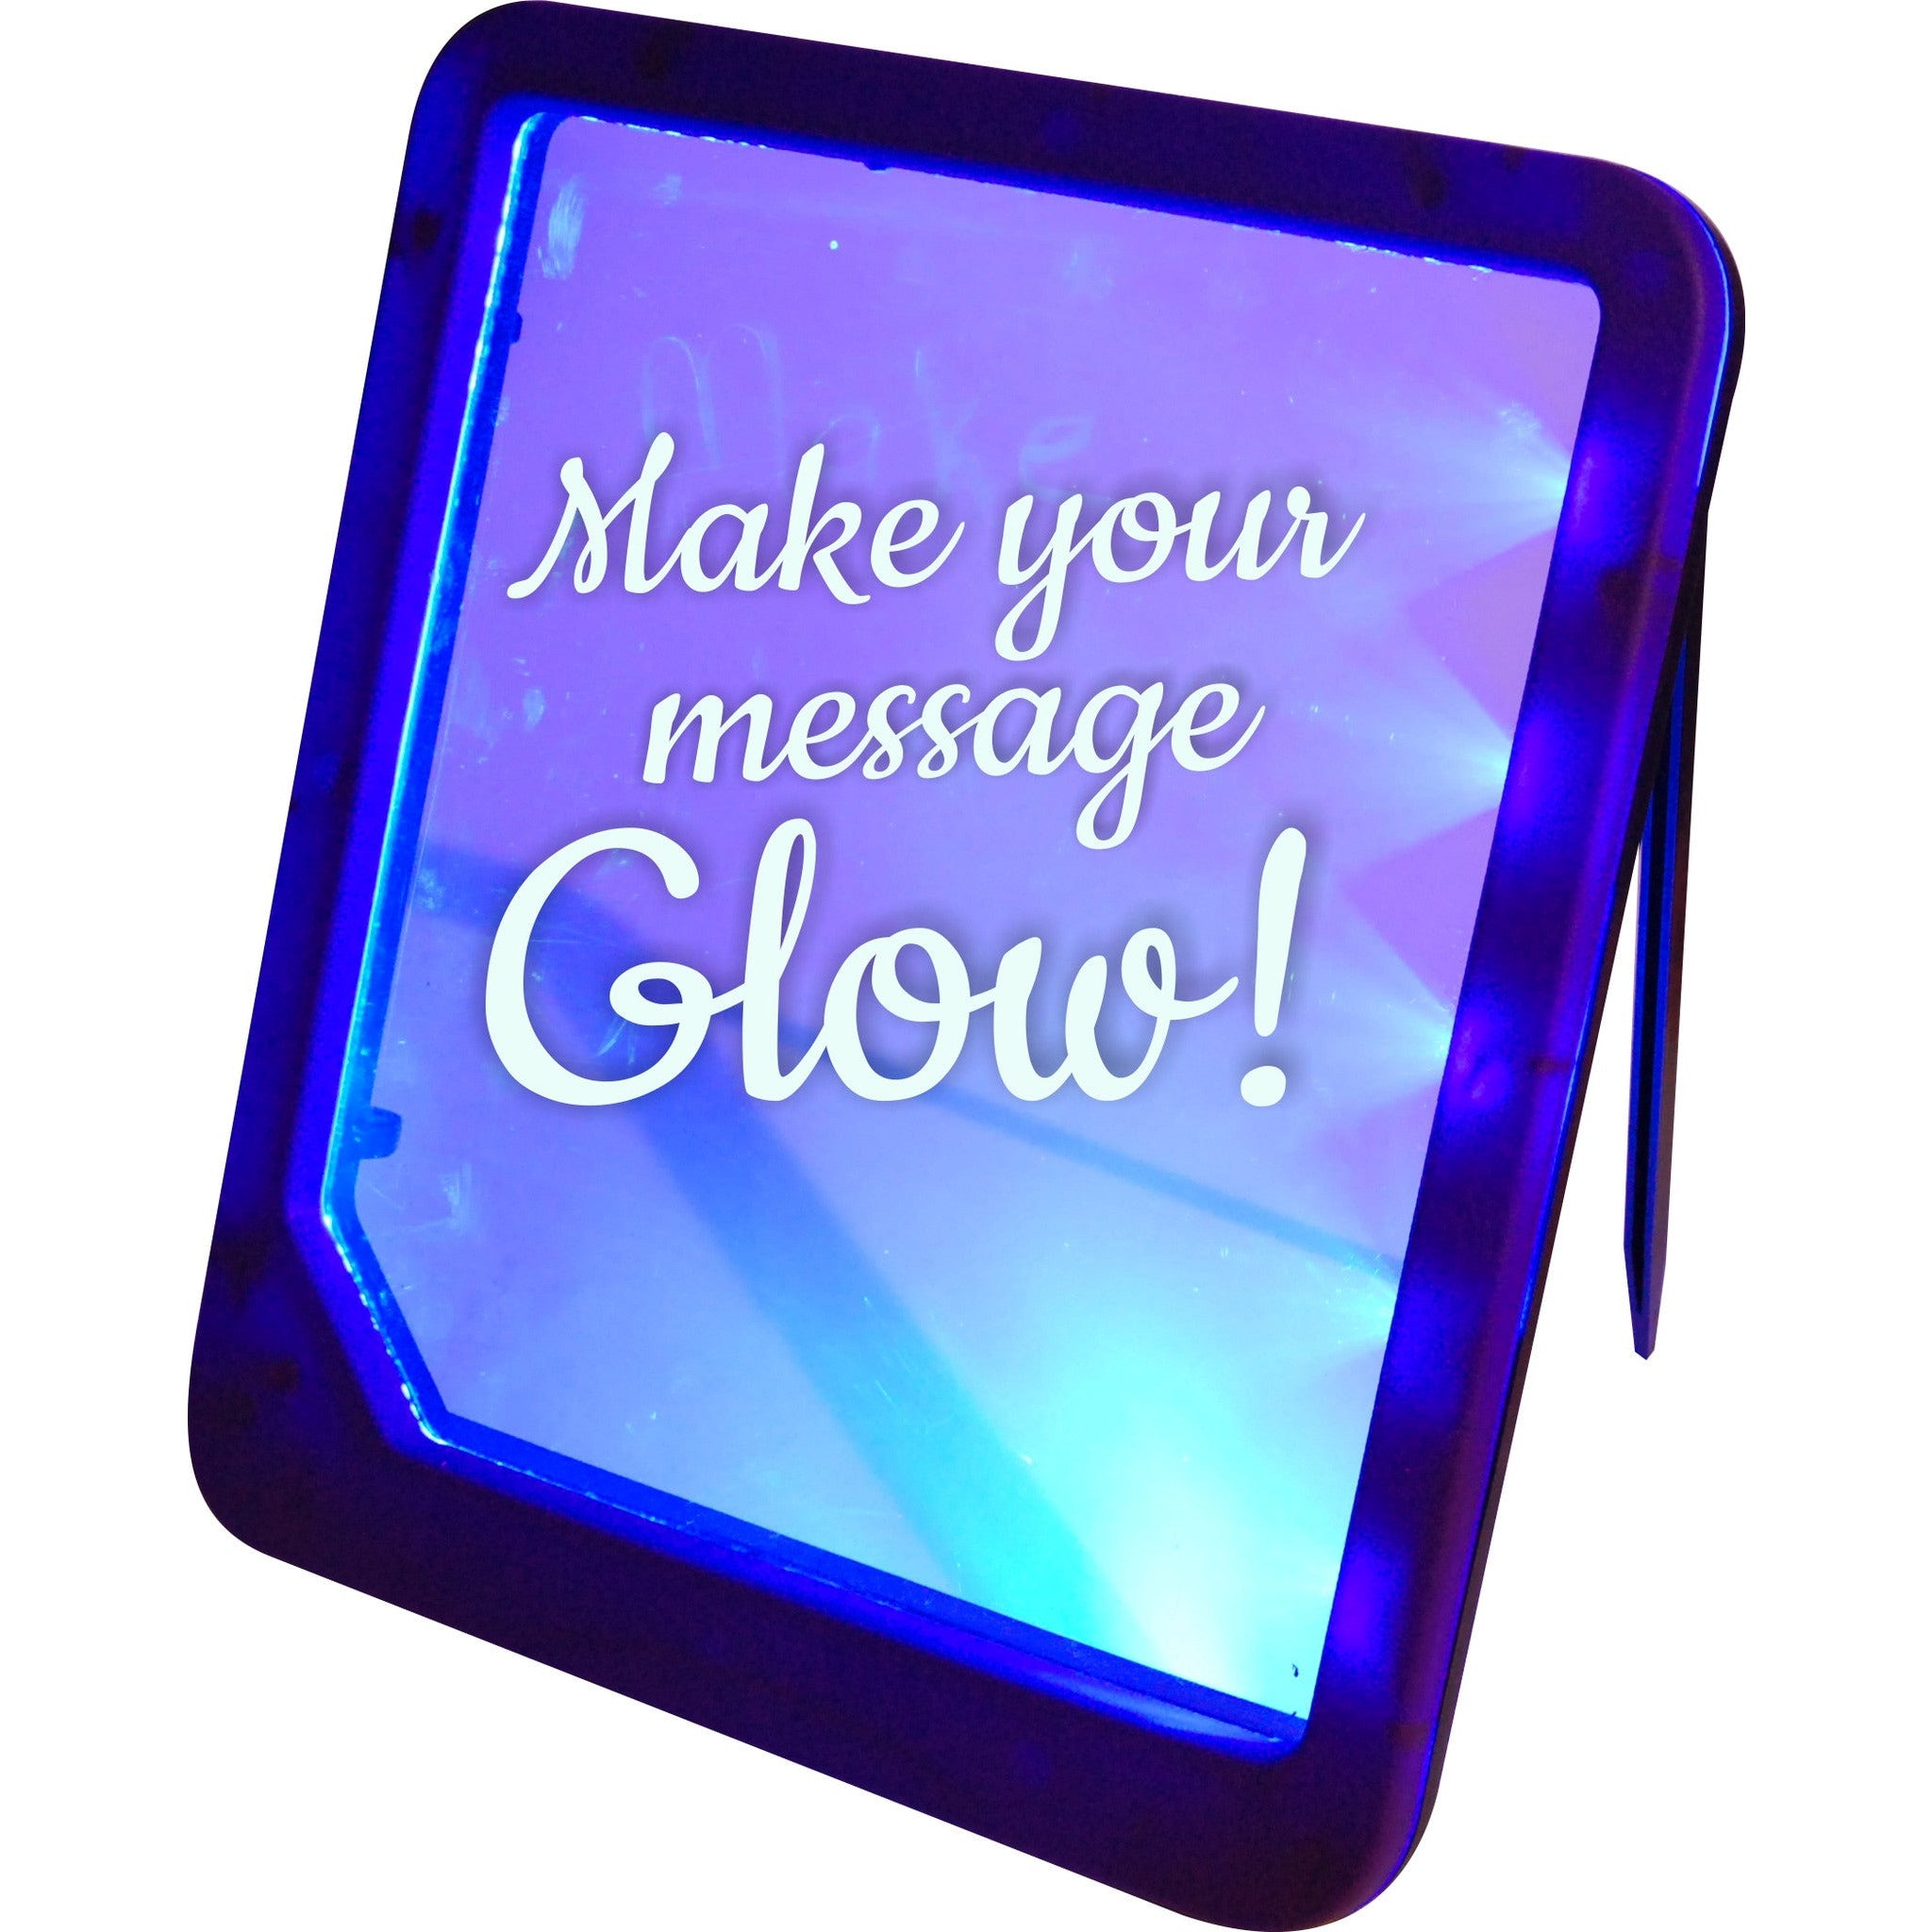 LED light message board with erasable marker